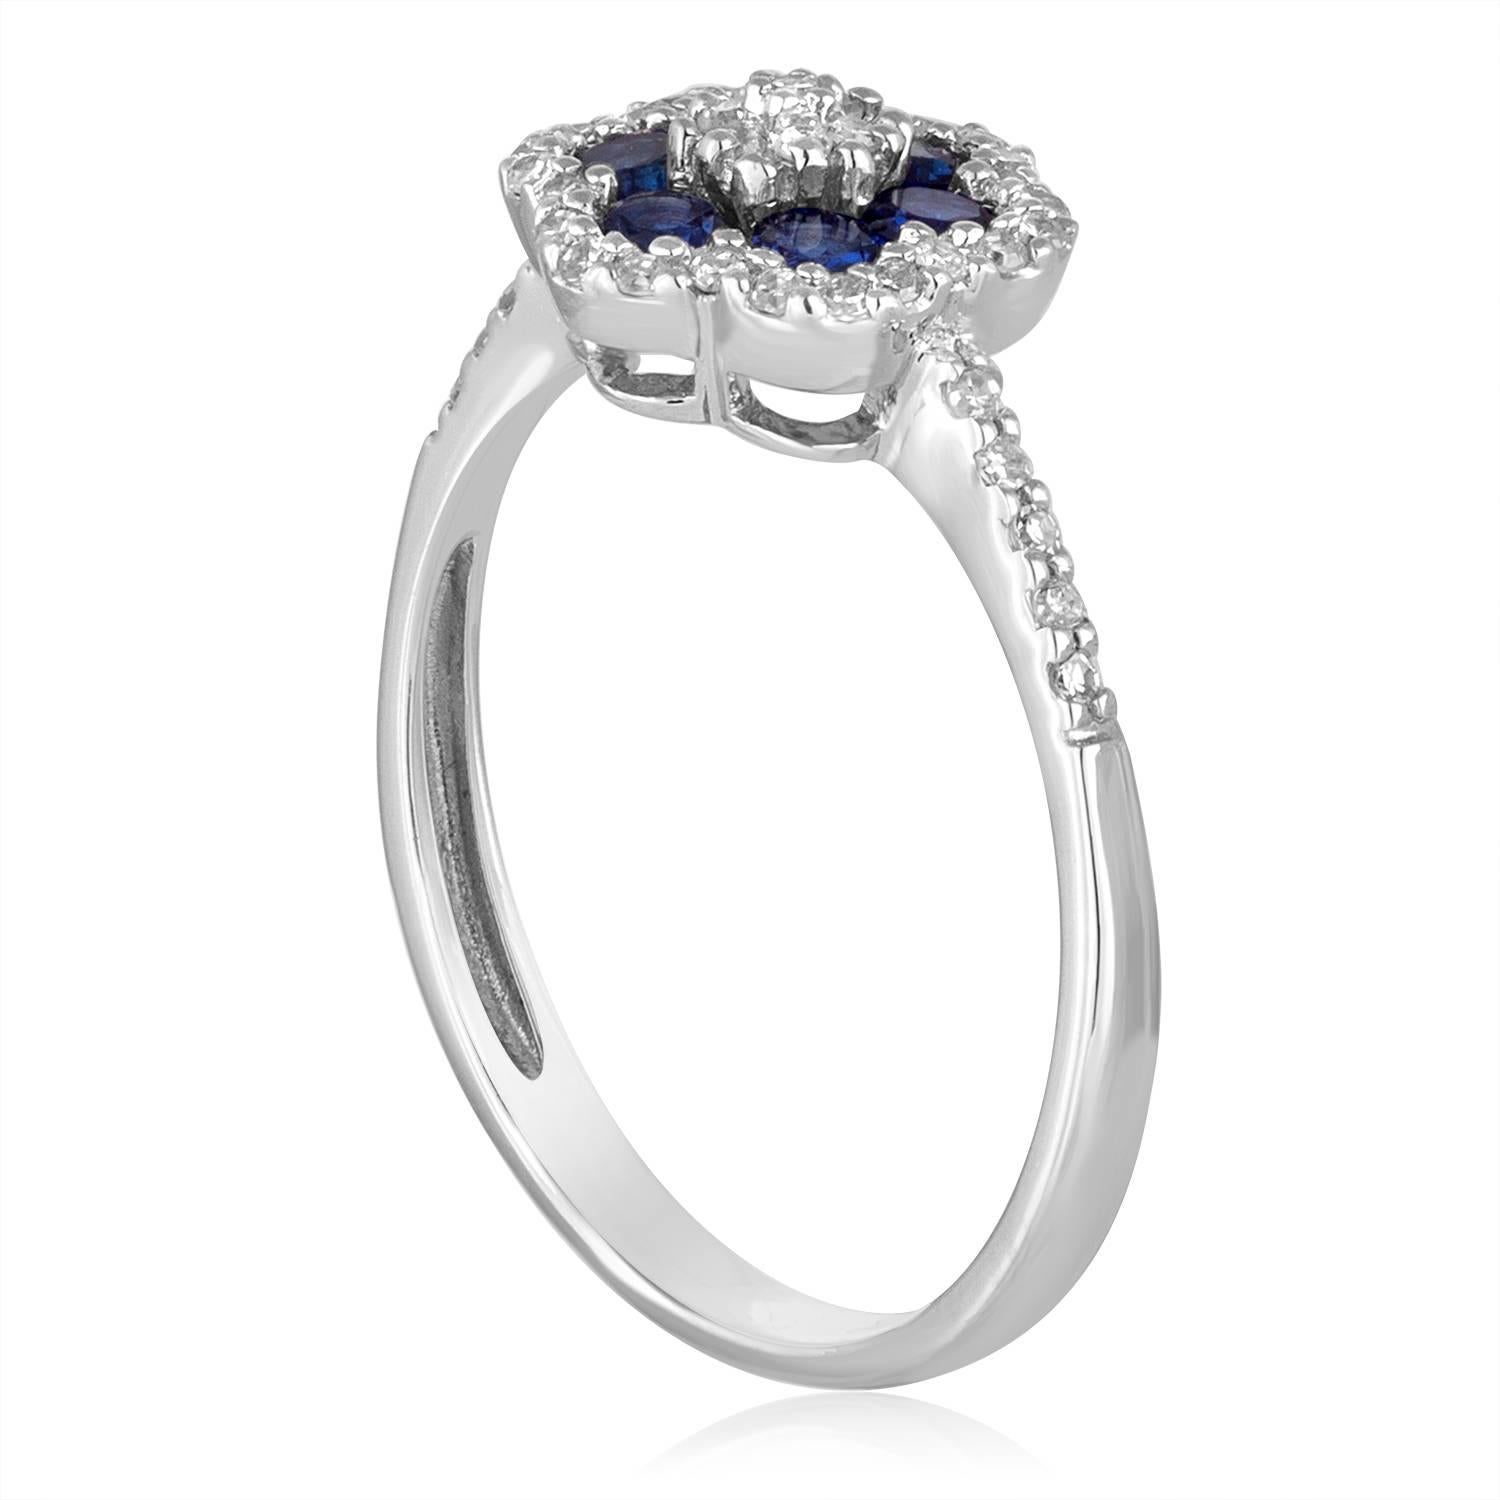 Delicate Flower Ring
The ring is 14K White Gold
There are 0.18 Carats In Diamonds G/H SI
There are 0.58 Carats in Blue Corundum (Lab-Created)
The top of the ring measures 6/16